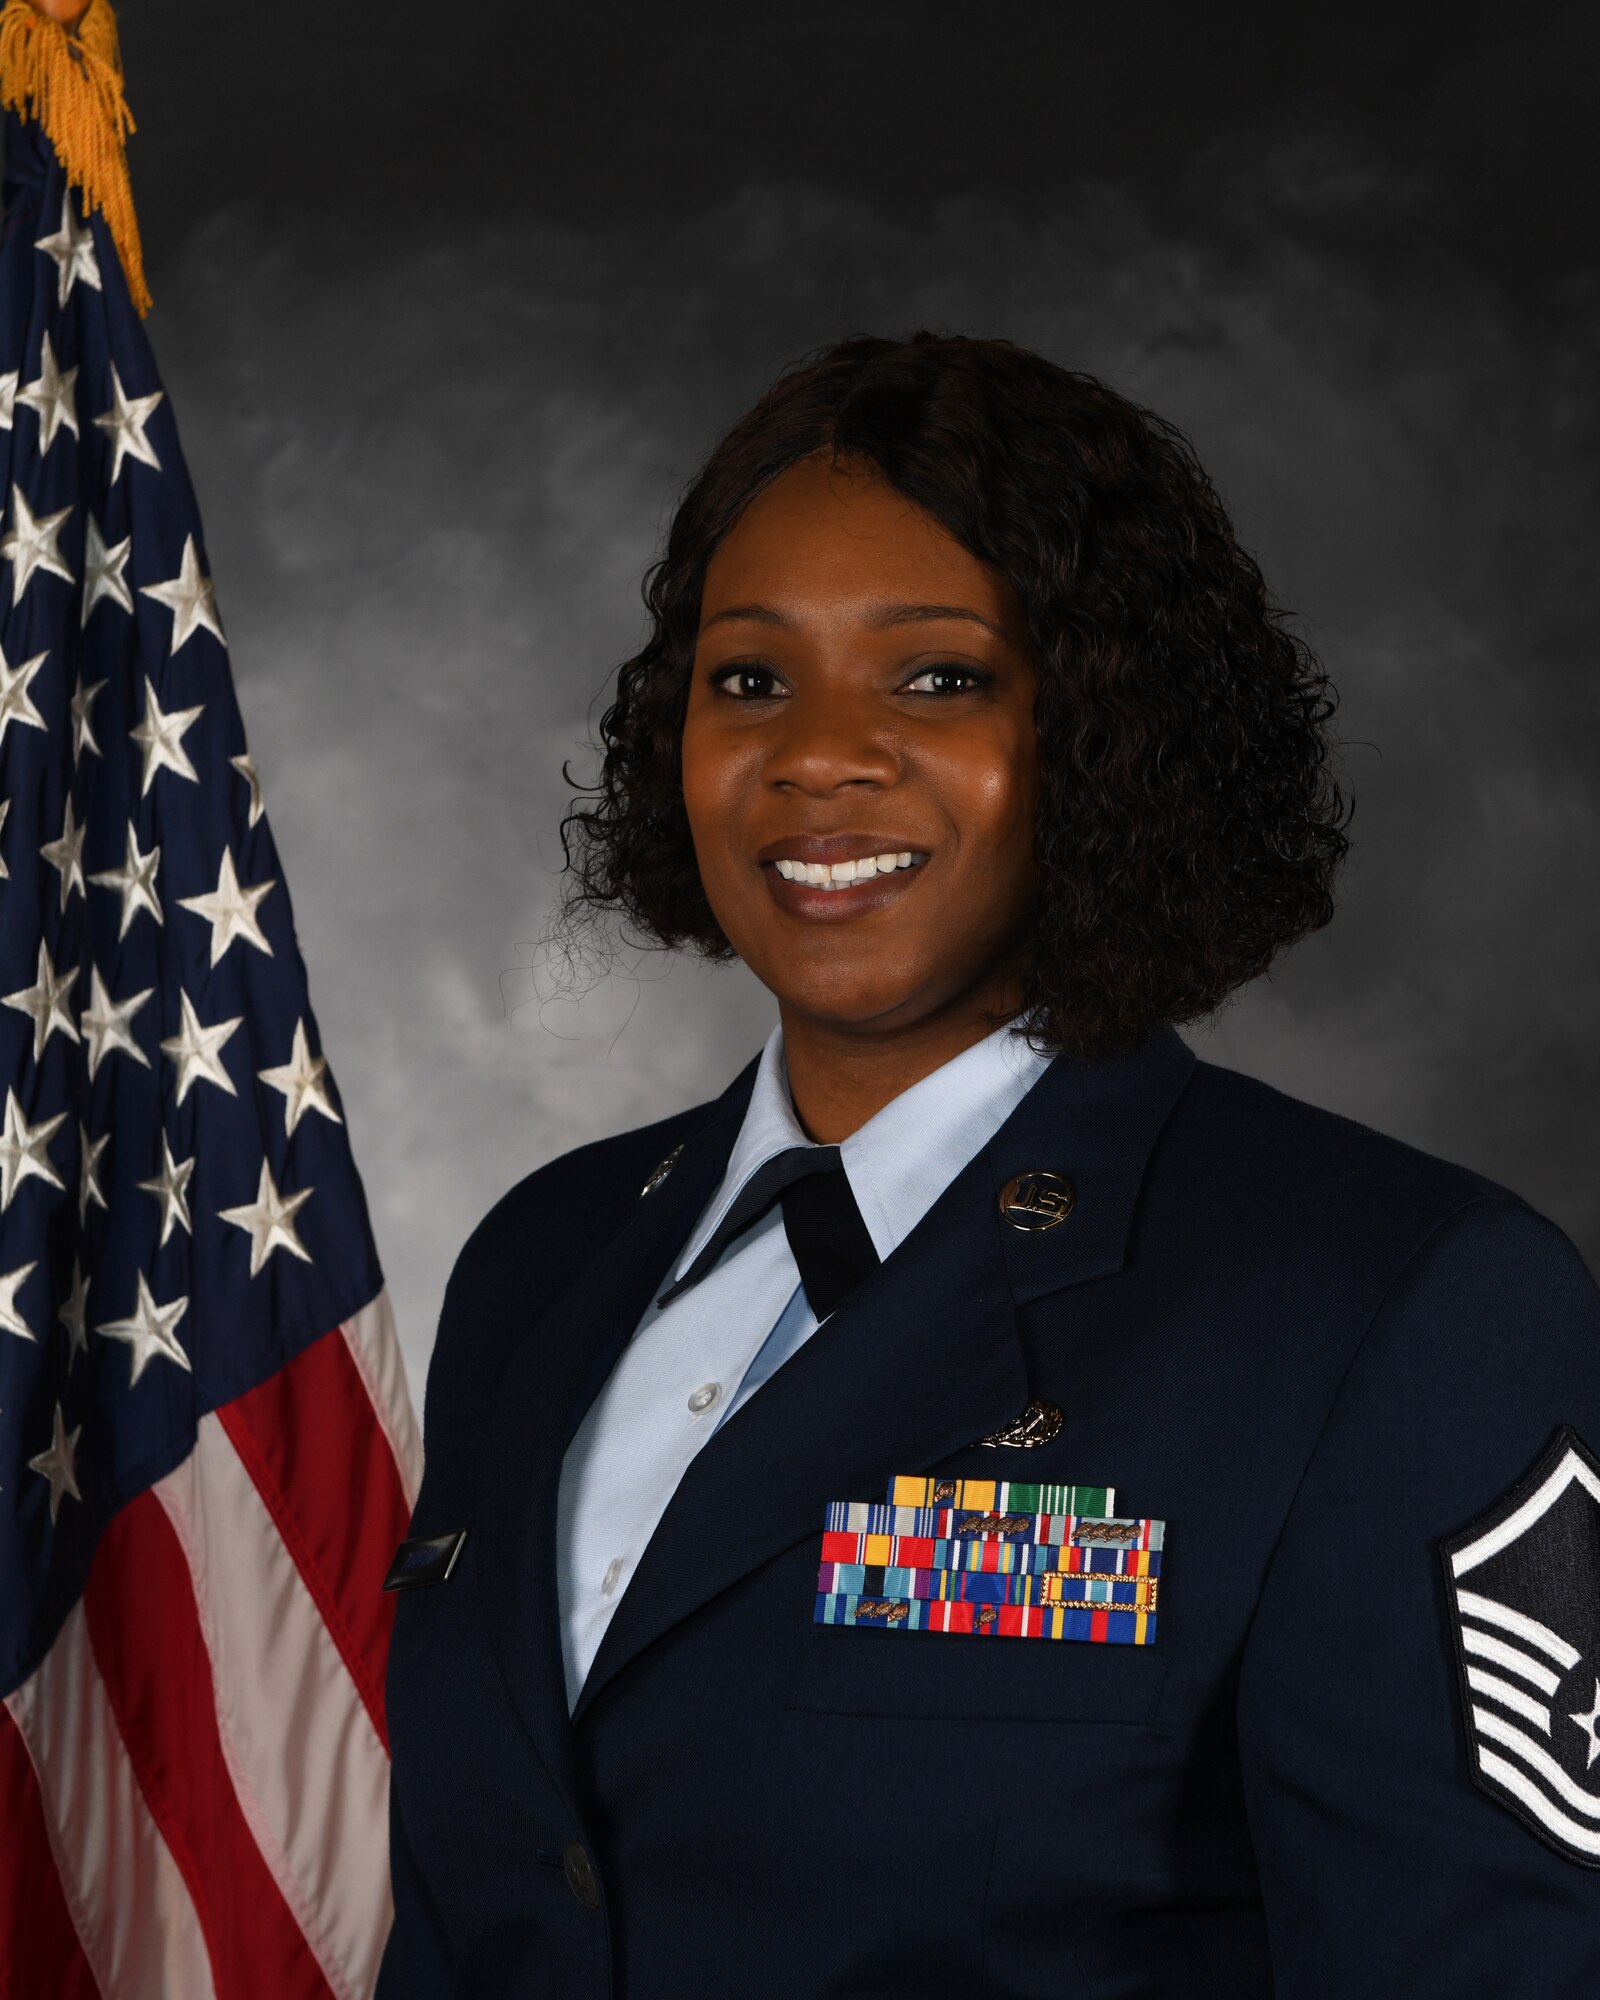 The official bio photo of Air Force Master Sergeant Rhoneiula Johnson.